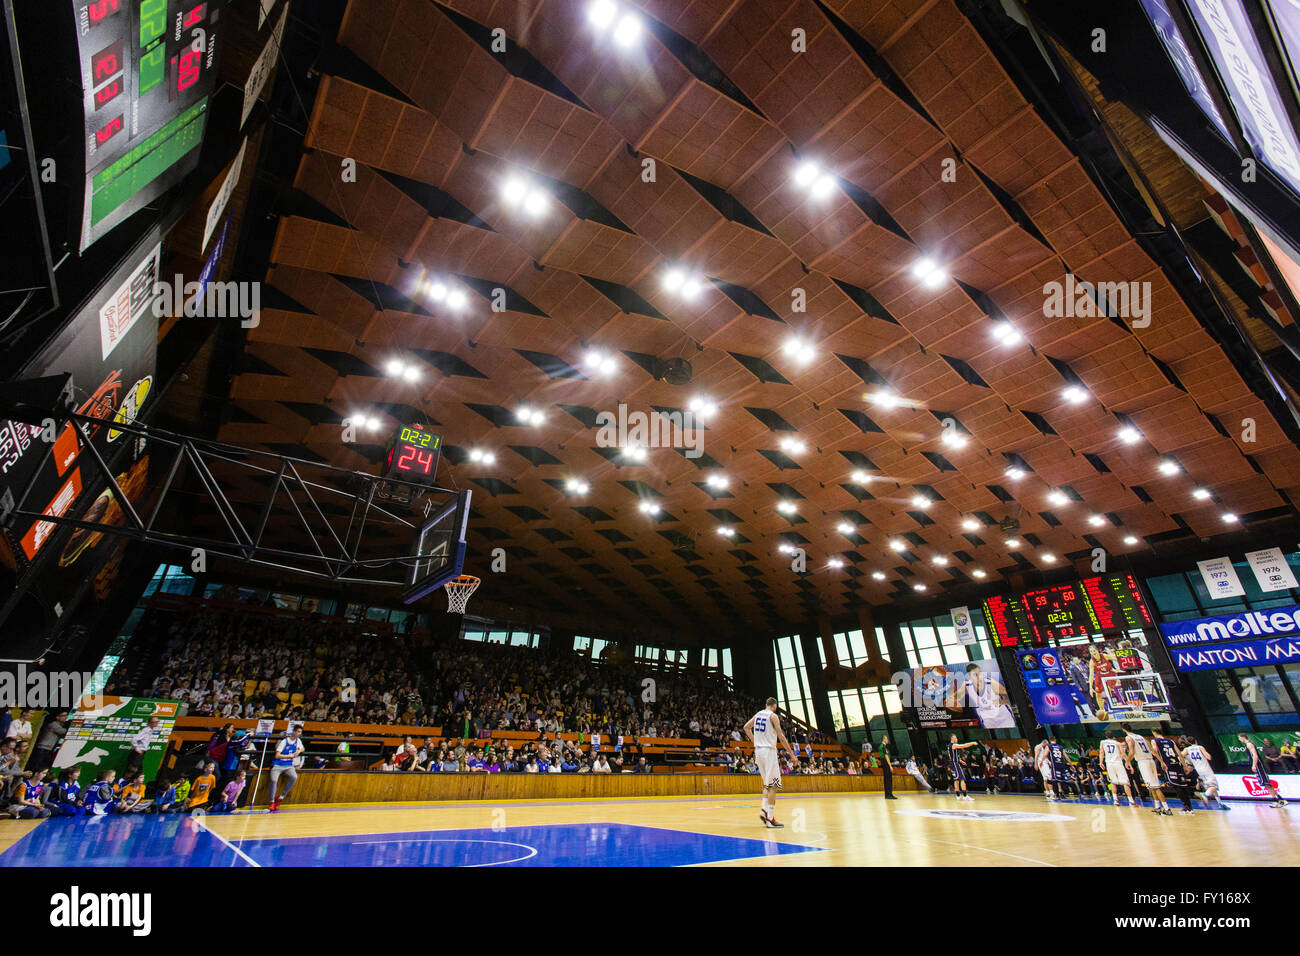 Page 3 - Nbl High Resolution Stock Photography and Images - Alamy